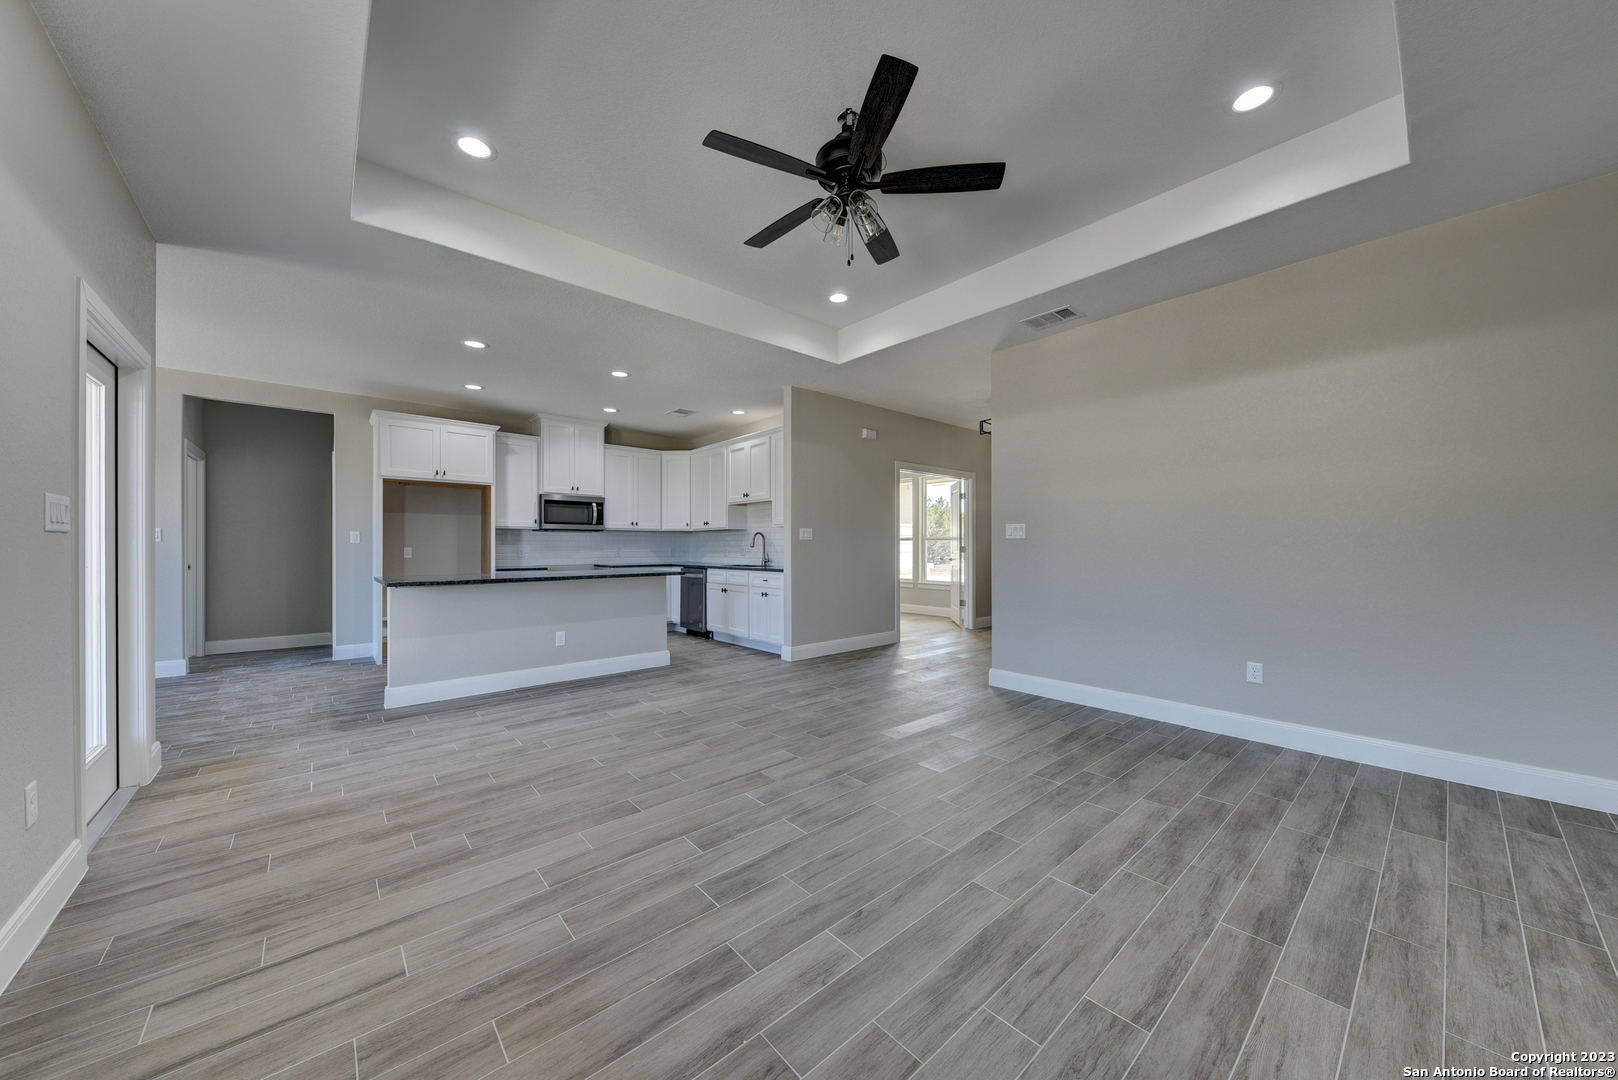 a view of an empty room and kitchen view with wooden floor and a ceiling fan